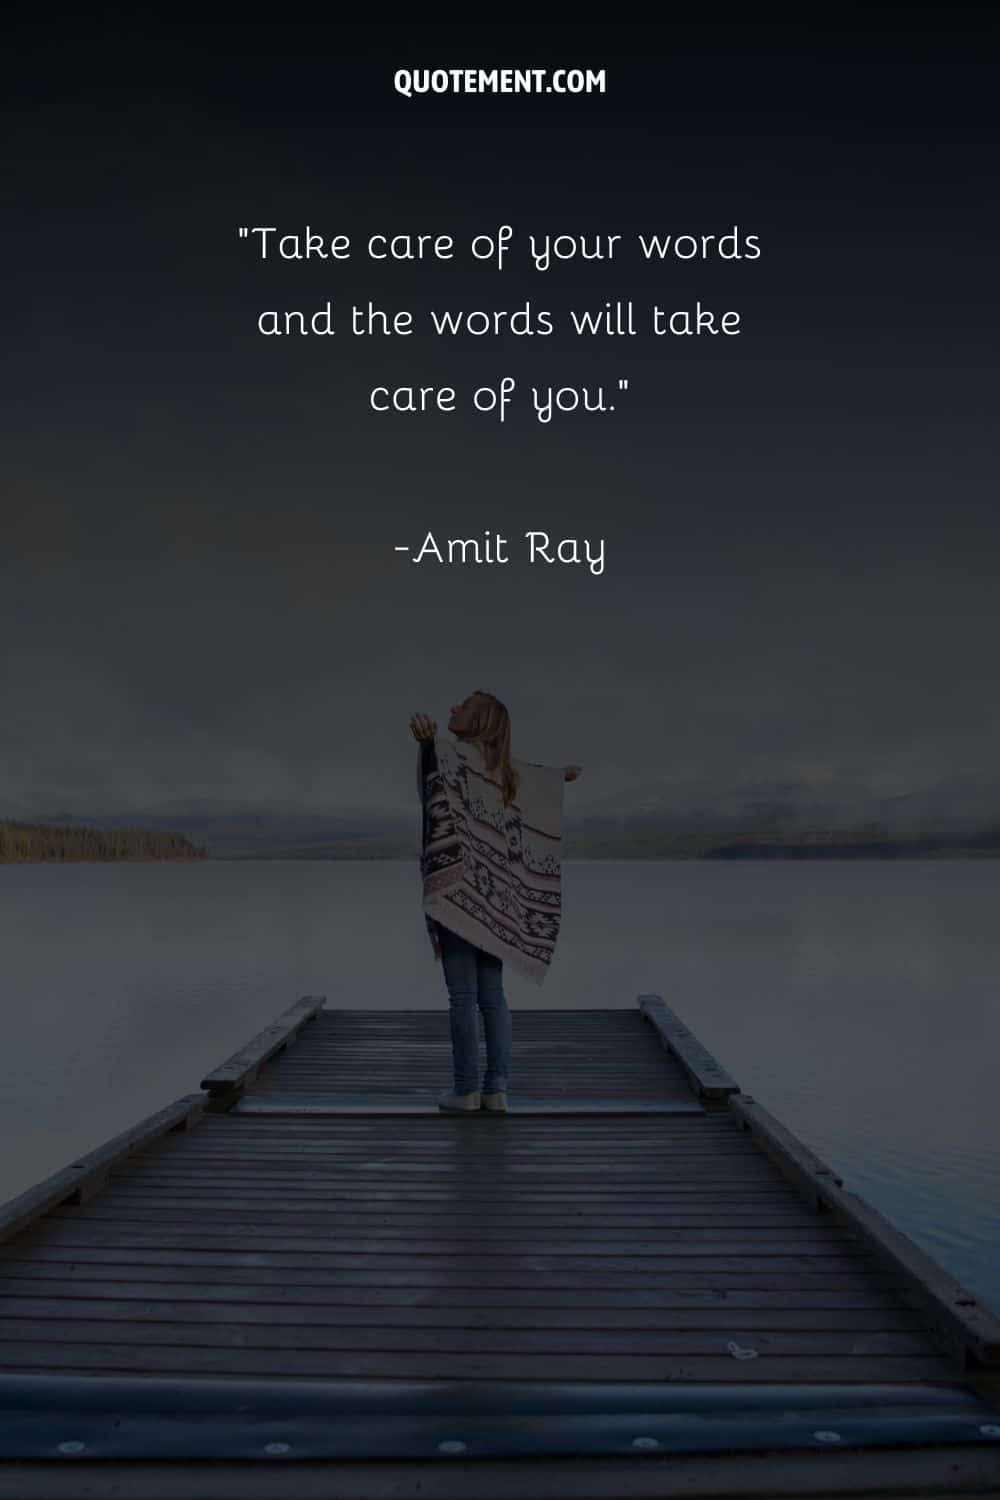 Take care of your words and the words will take care of you